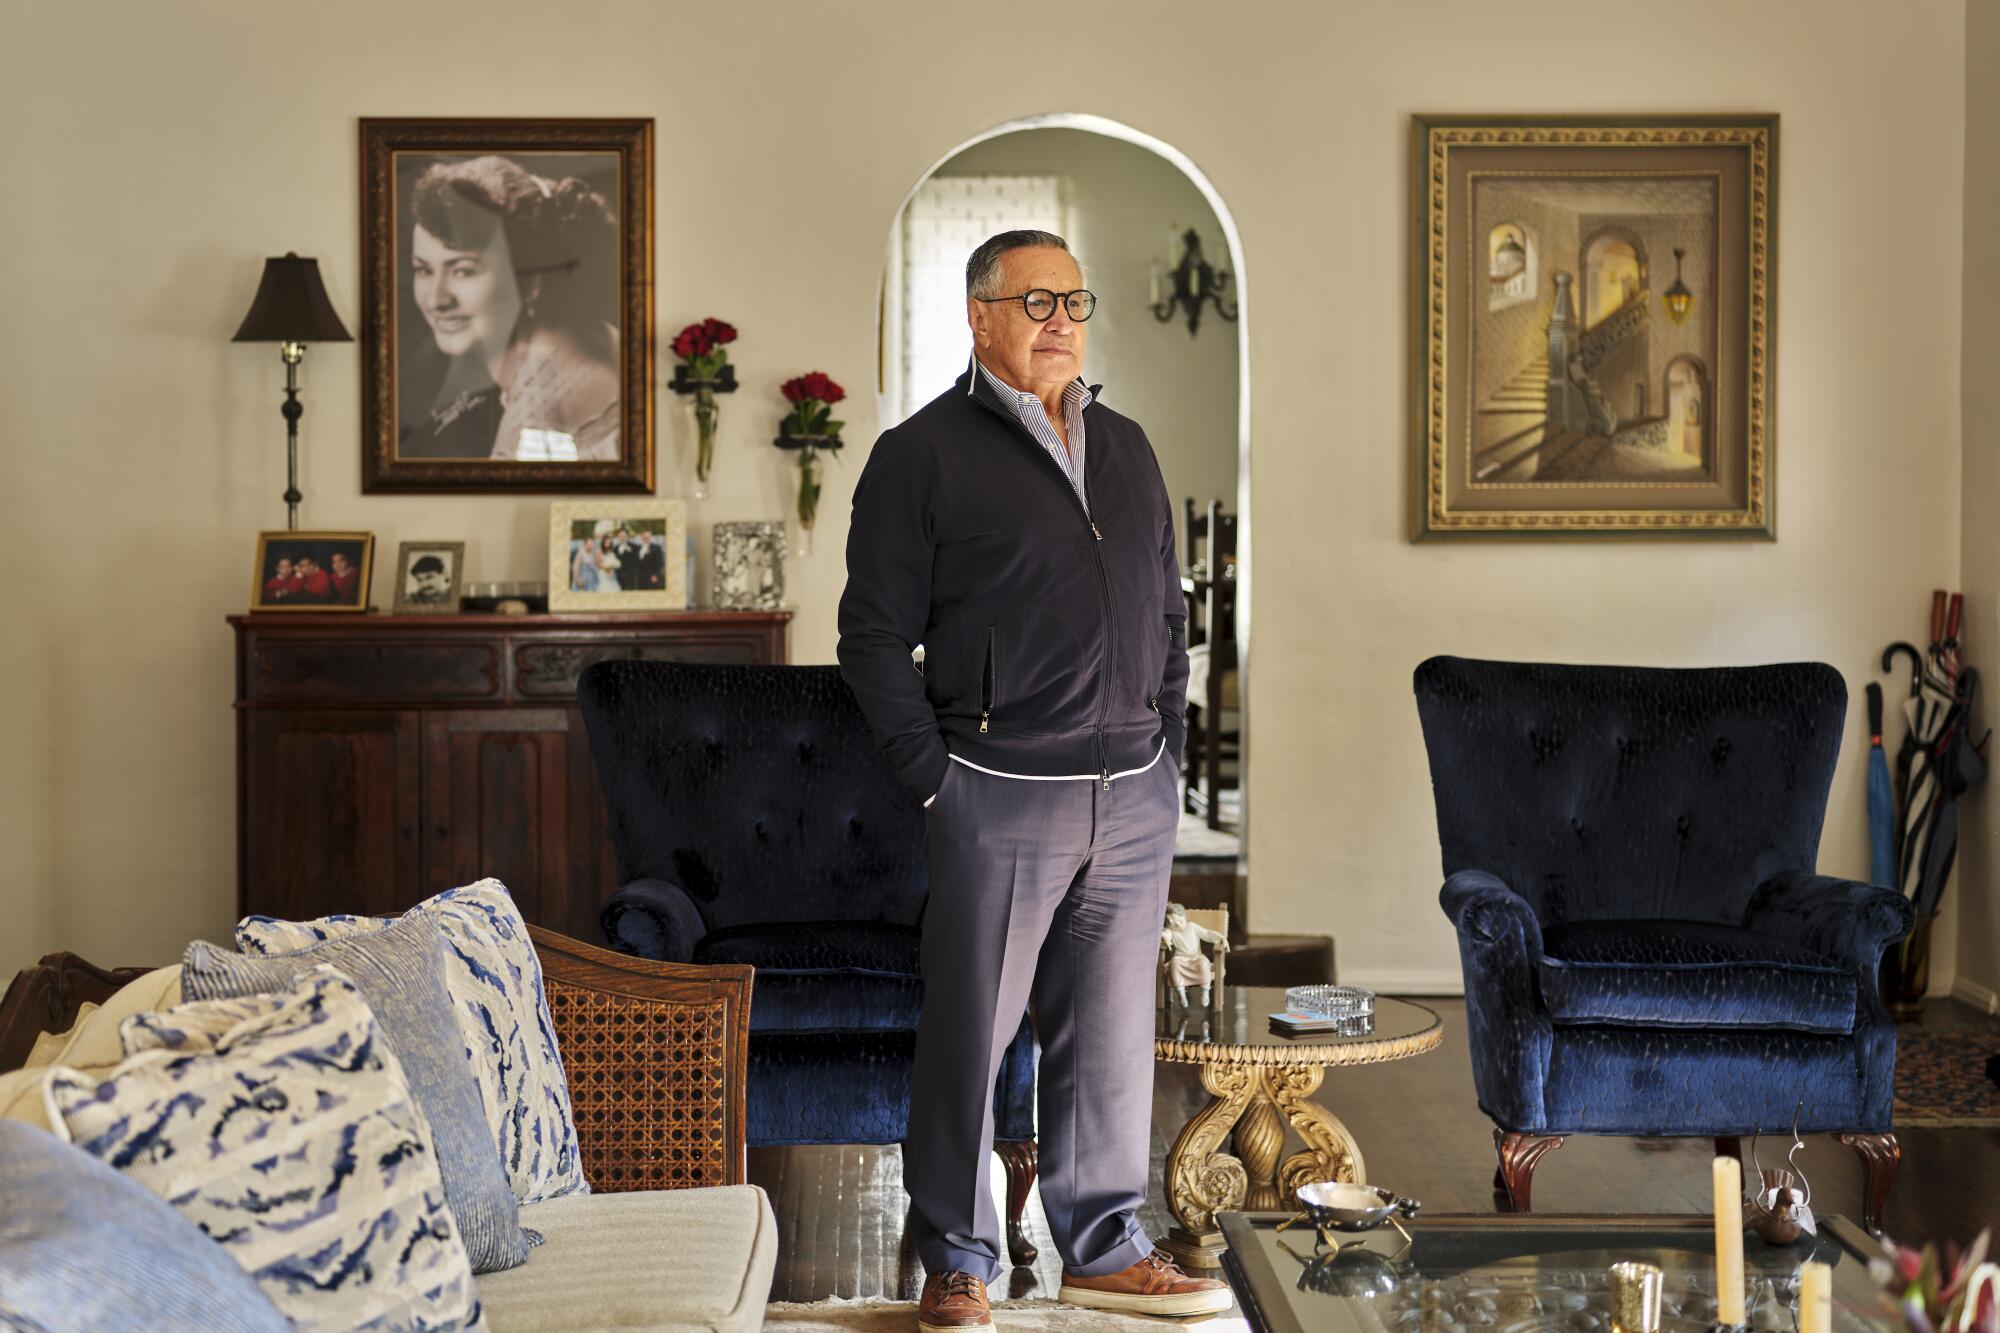 Jaime Jarrin stands in his home, hands in his pockets